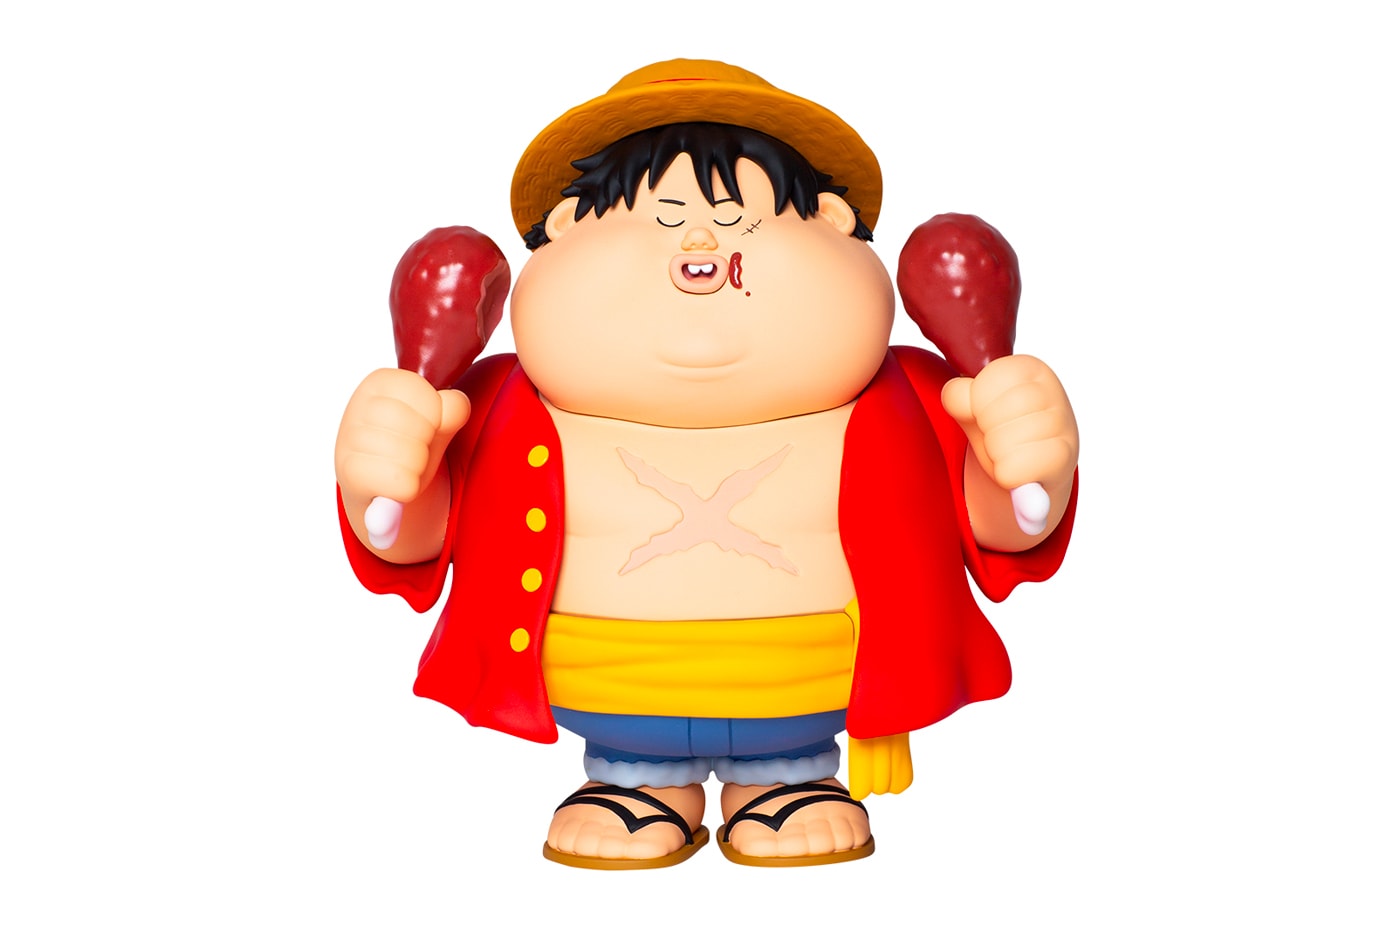 The BUSTERCALL Project Premium BANDAI Chunky Monkey D Luffy tony tony chopper toys collectibles collections figures anime tv series television